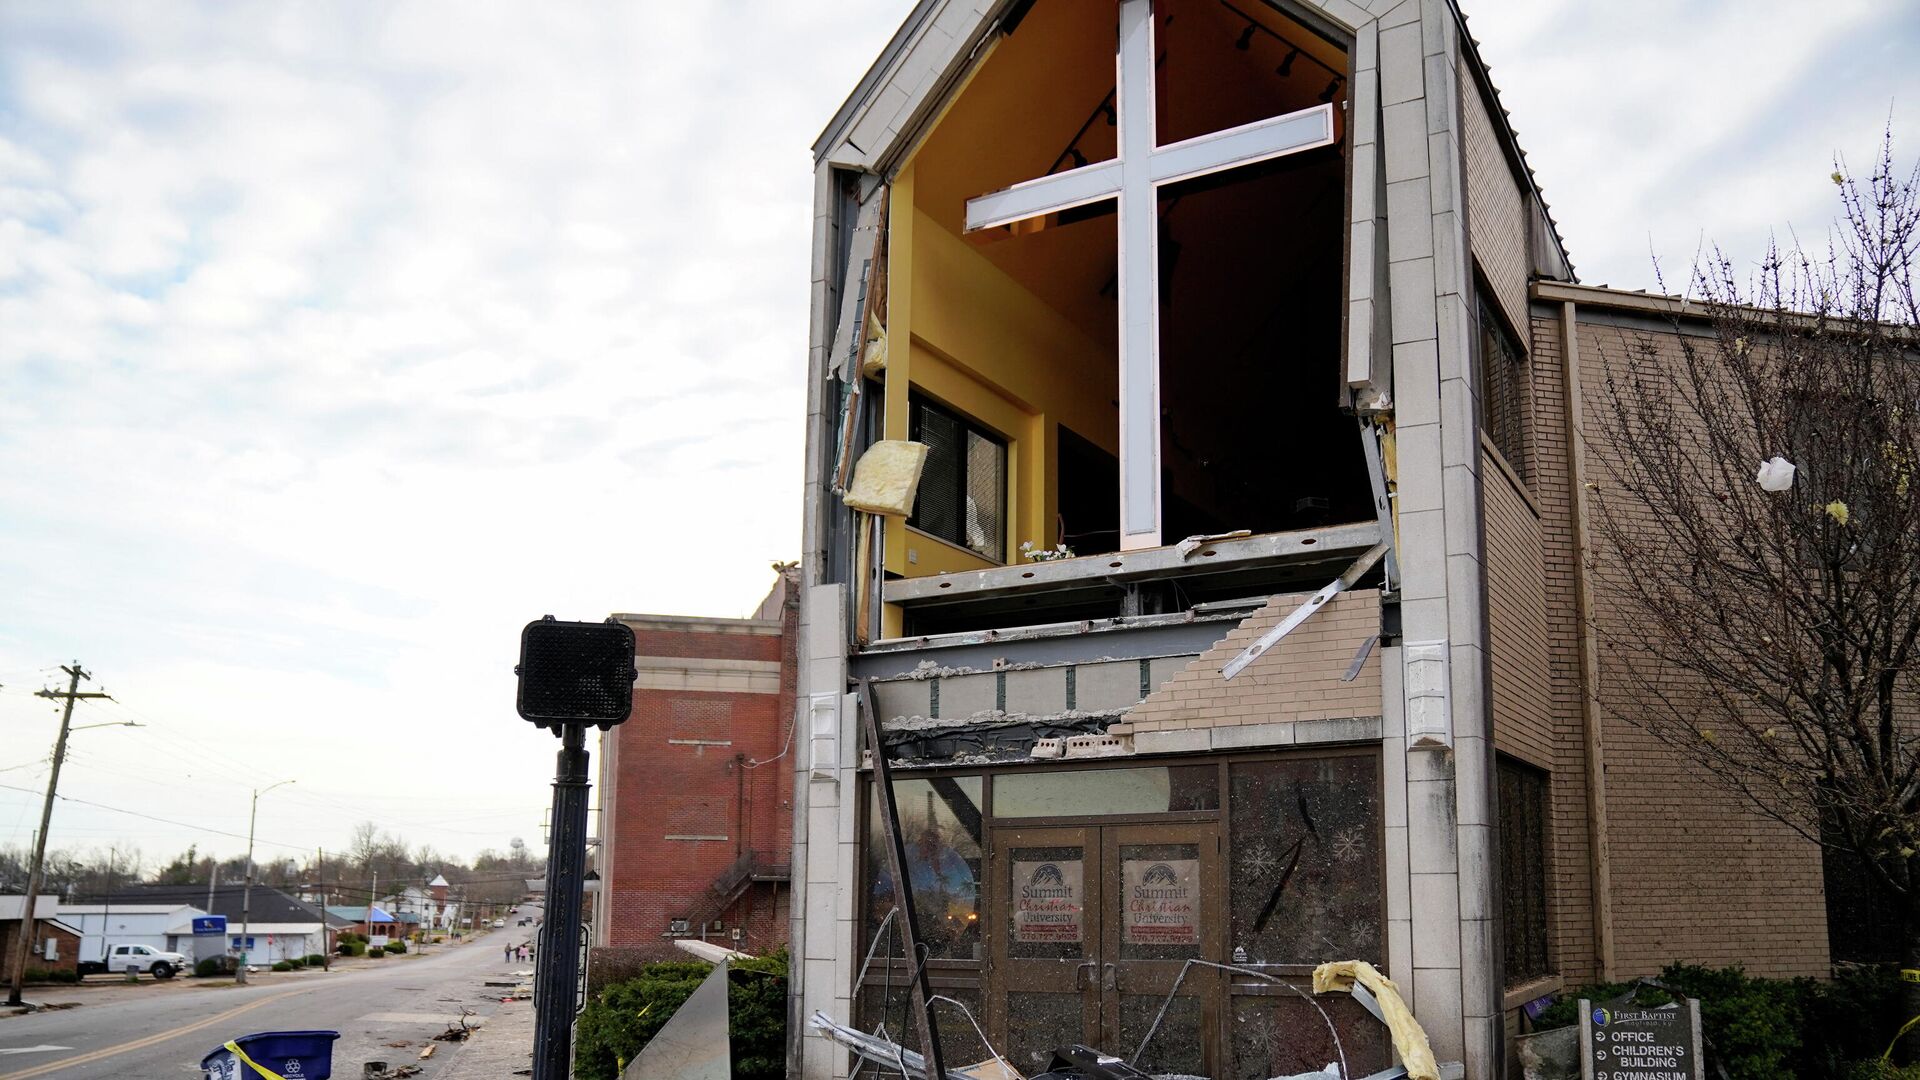 A church is seen missing its facade after a devastating outbreak of tornadoes ripped through several U.S. states, in Mayfield, Kentucky, U.S., December 11, 2021 - Sputnik International, 1920, 13.12.2021